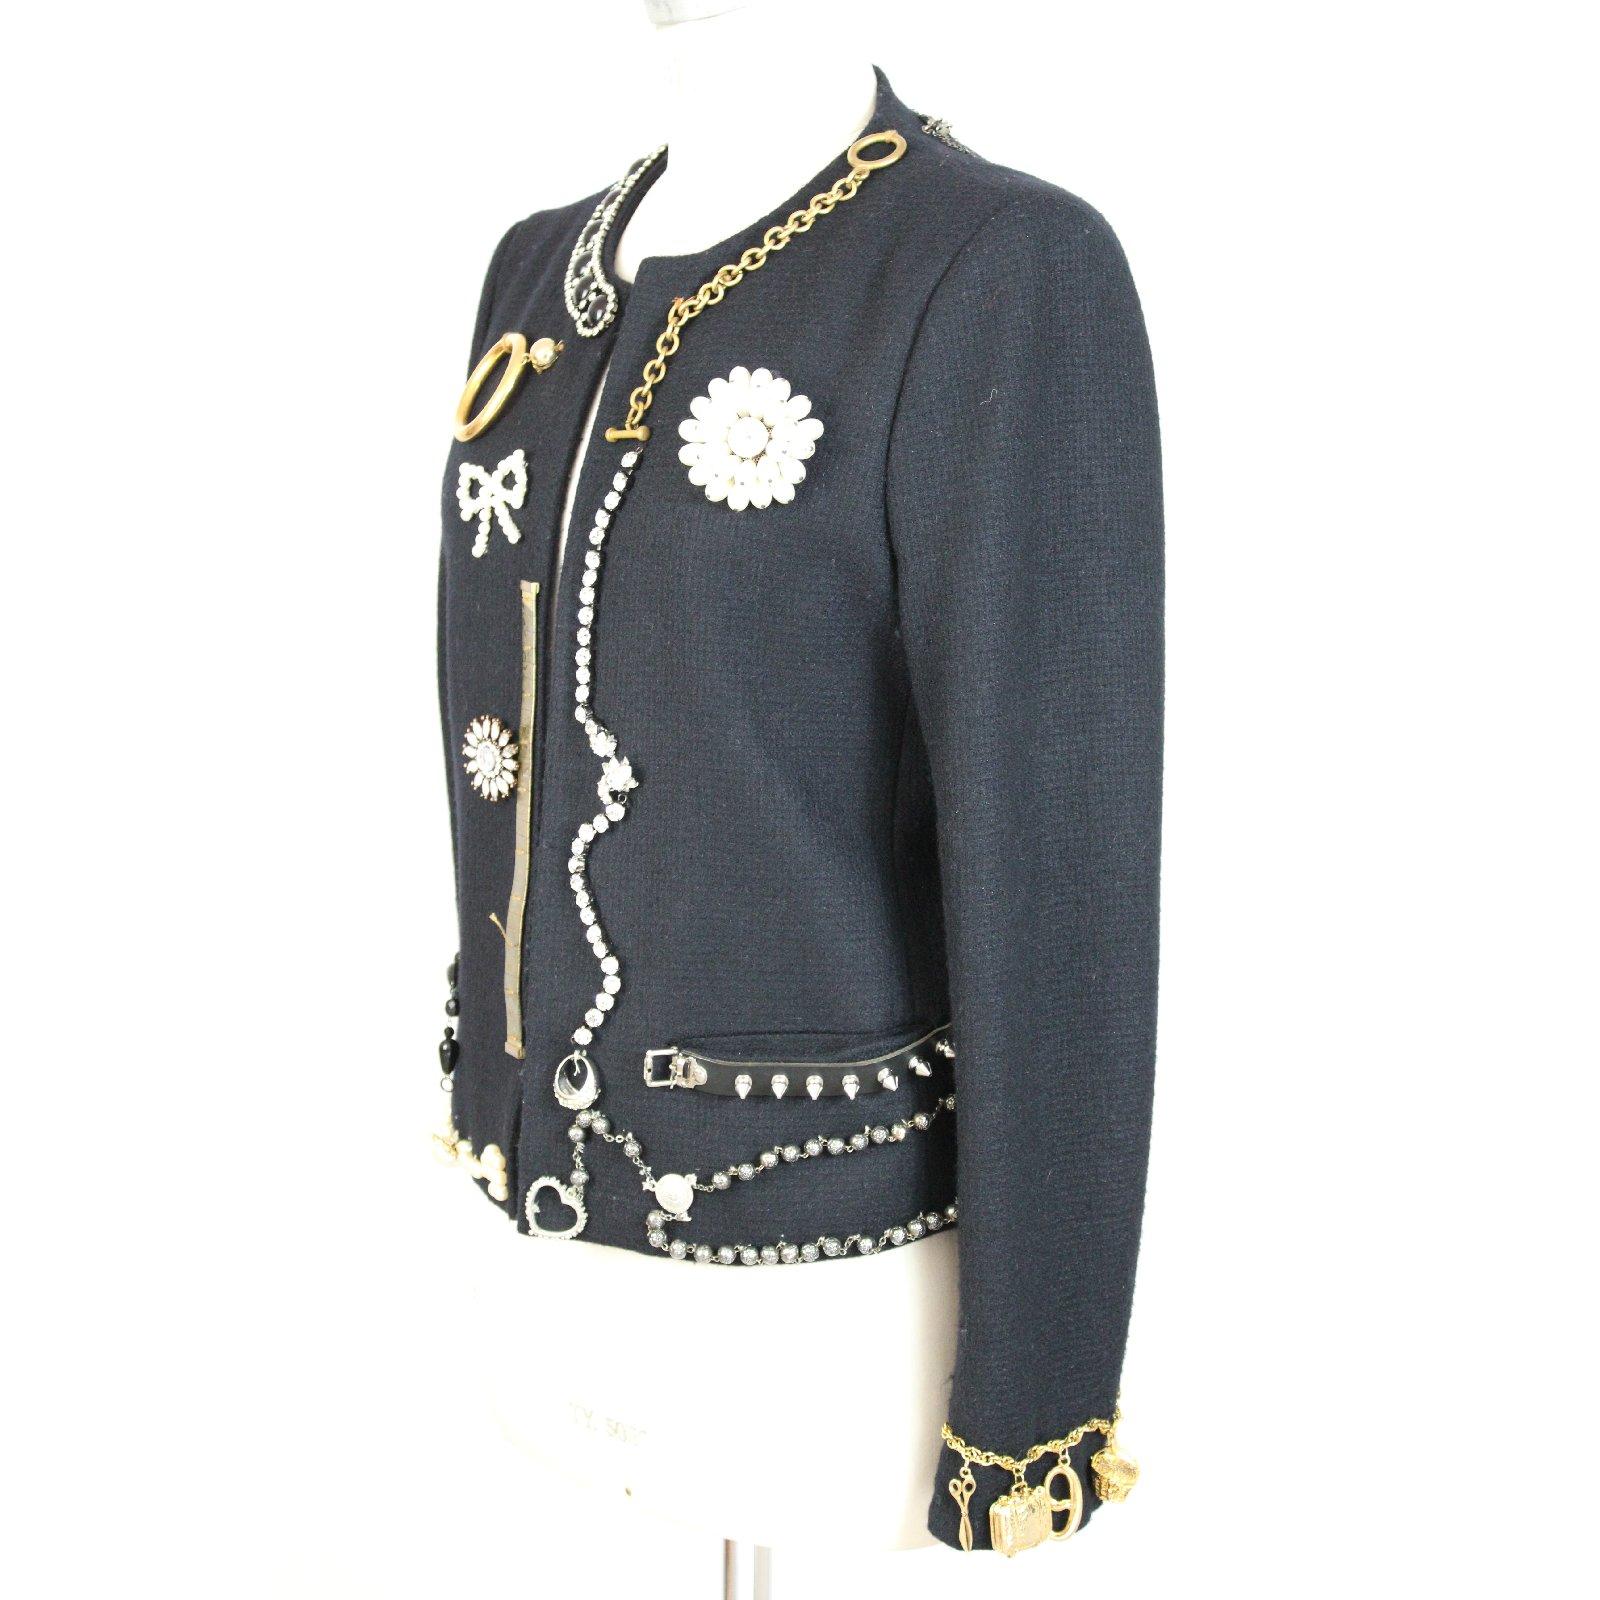 Moschino vintage blue jacket. The jacket has various applications. Chains, necklaces, jewels, rings and pearls make this jacket unique.
A work of art made in Italy. These jackets have been produced in a limited  edition. The fabric is 100% virgin